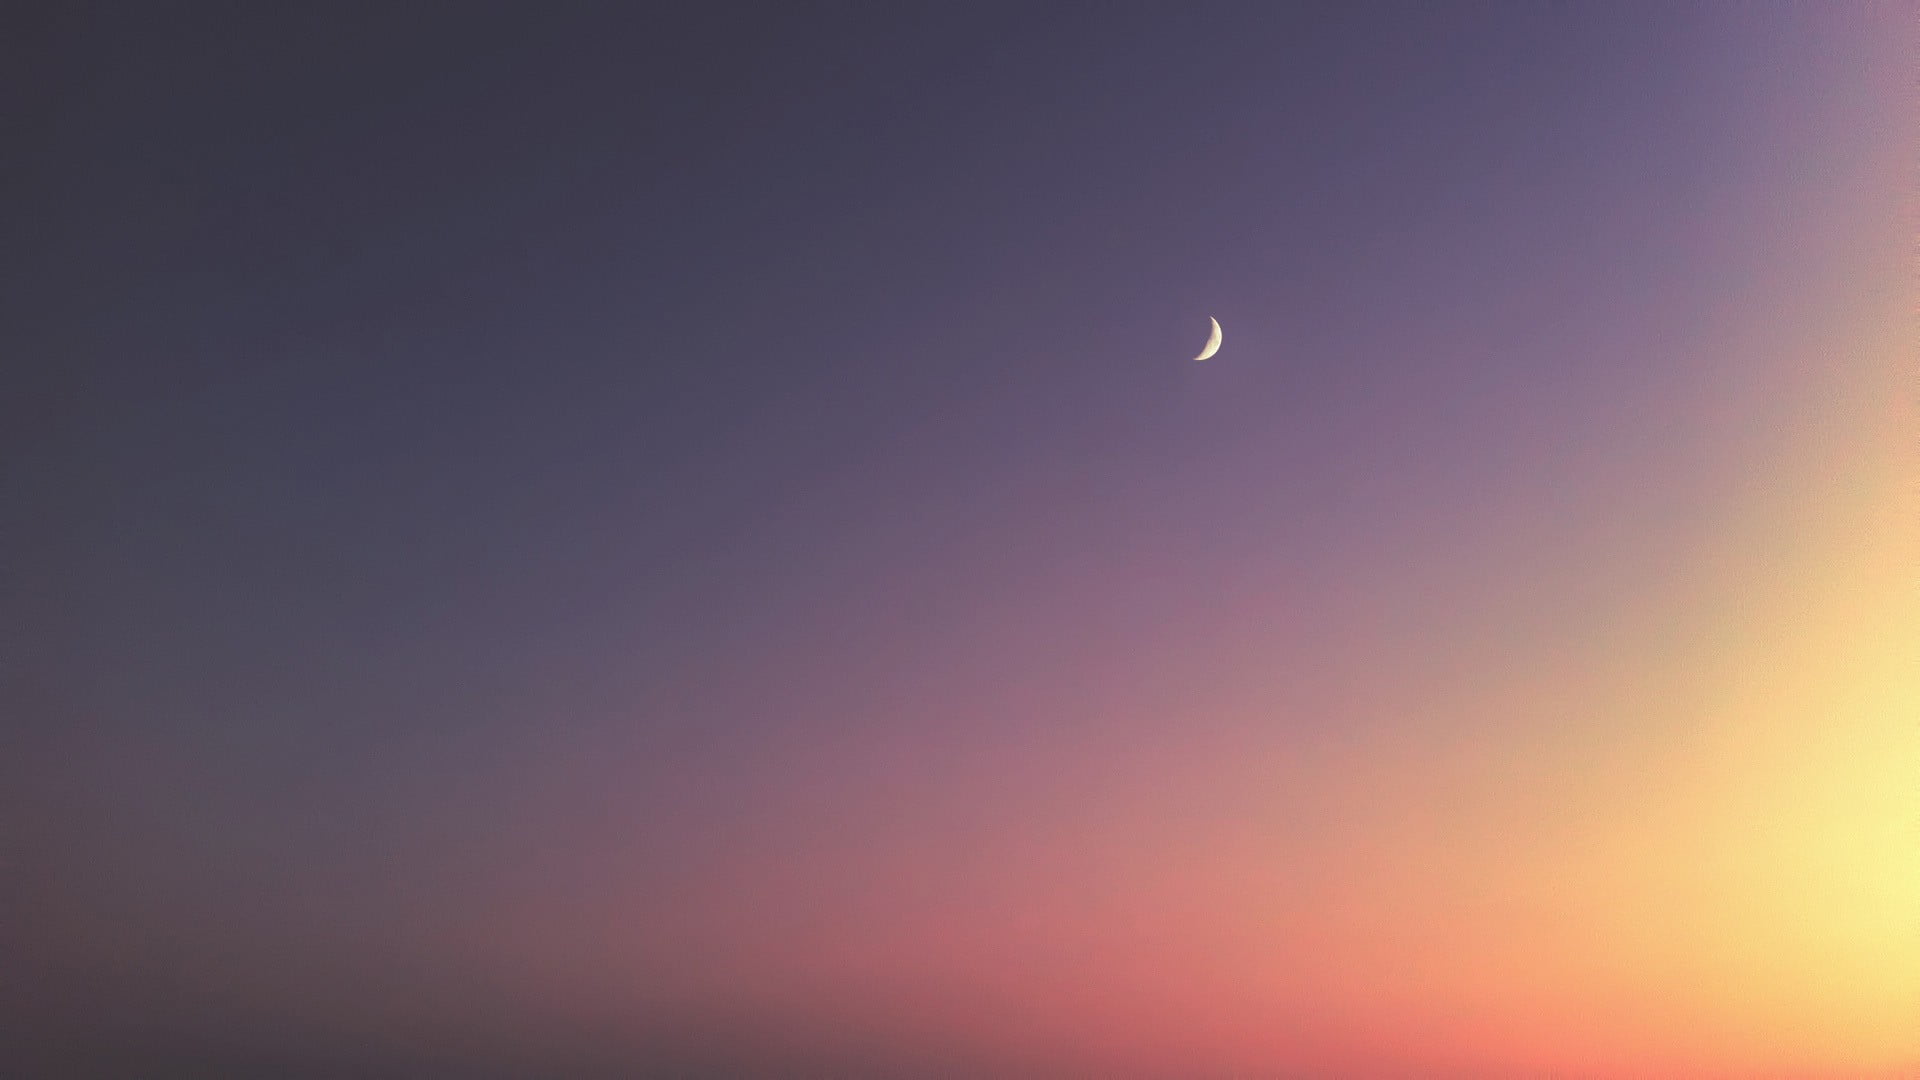 crescent moon, sky, beauty in nature, scenics - nature, low angle view